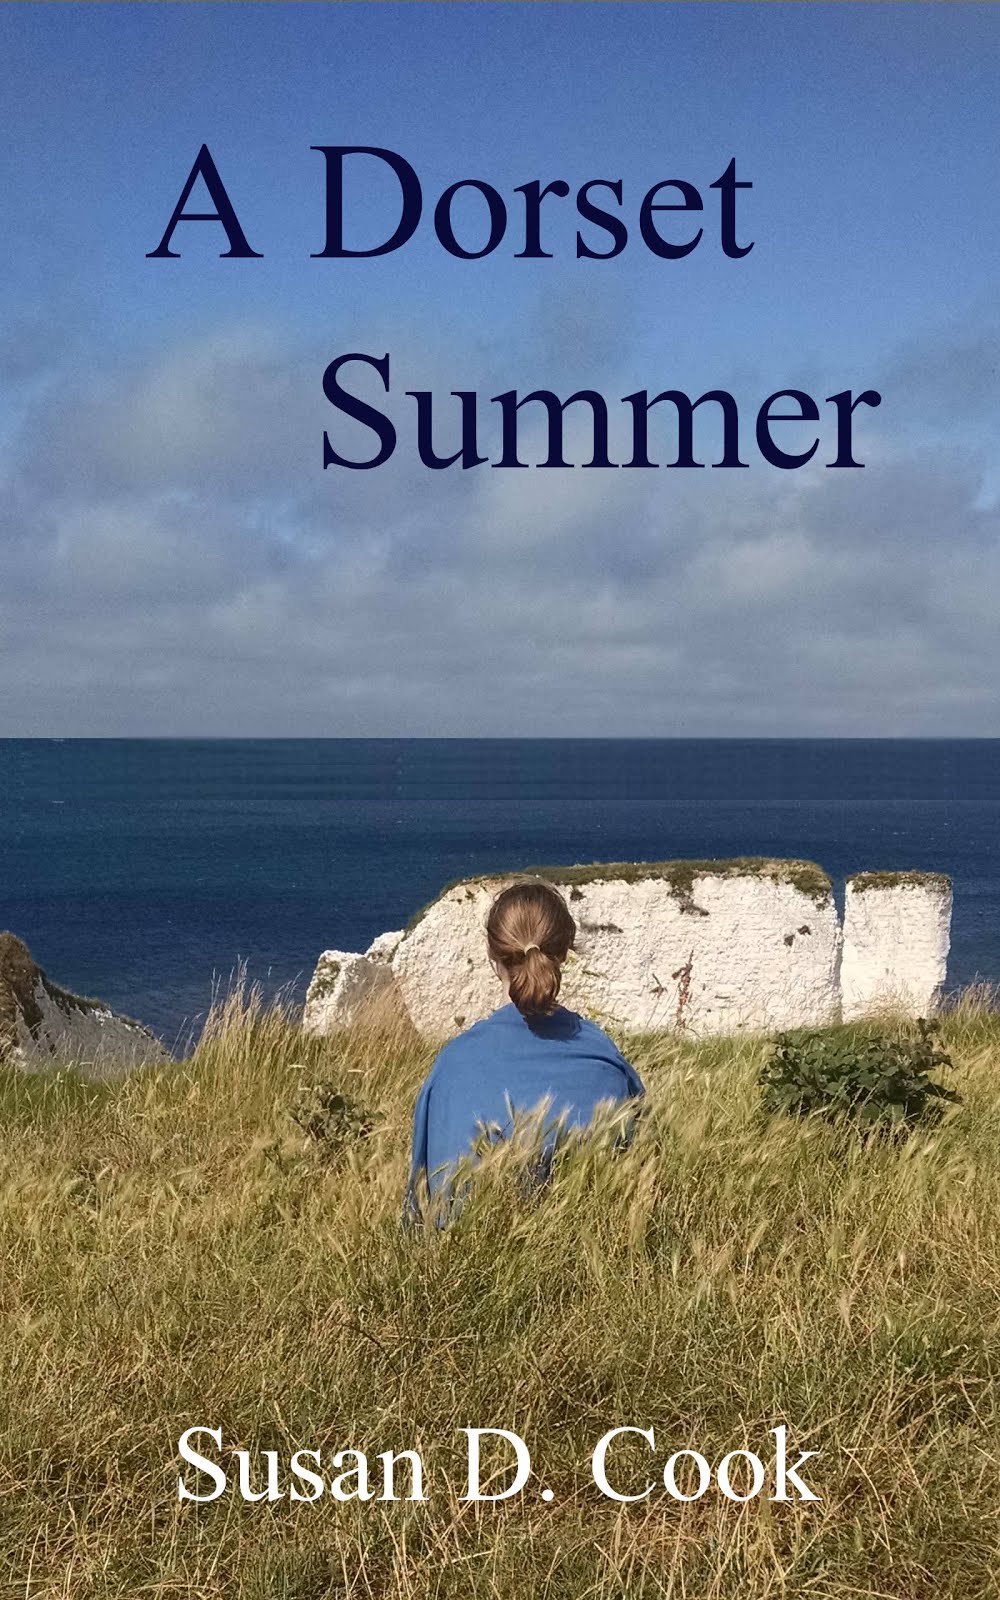 A Dorset Summer is available - click the cover for more details!